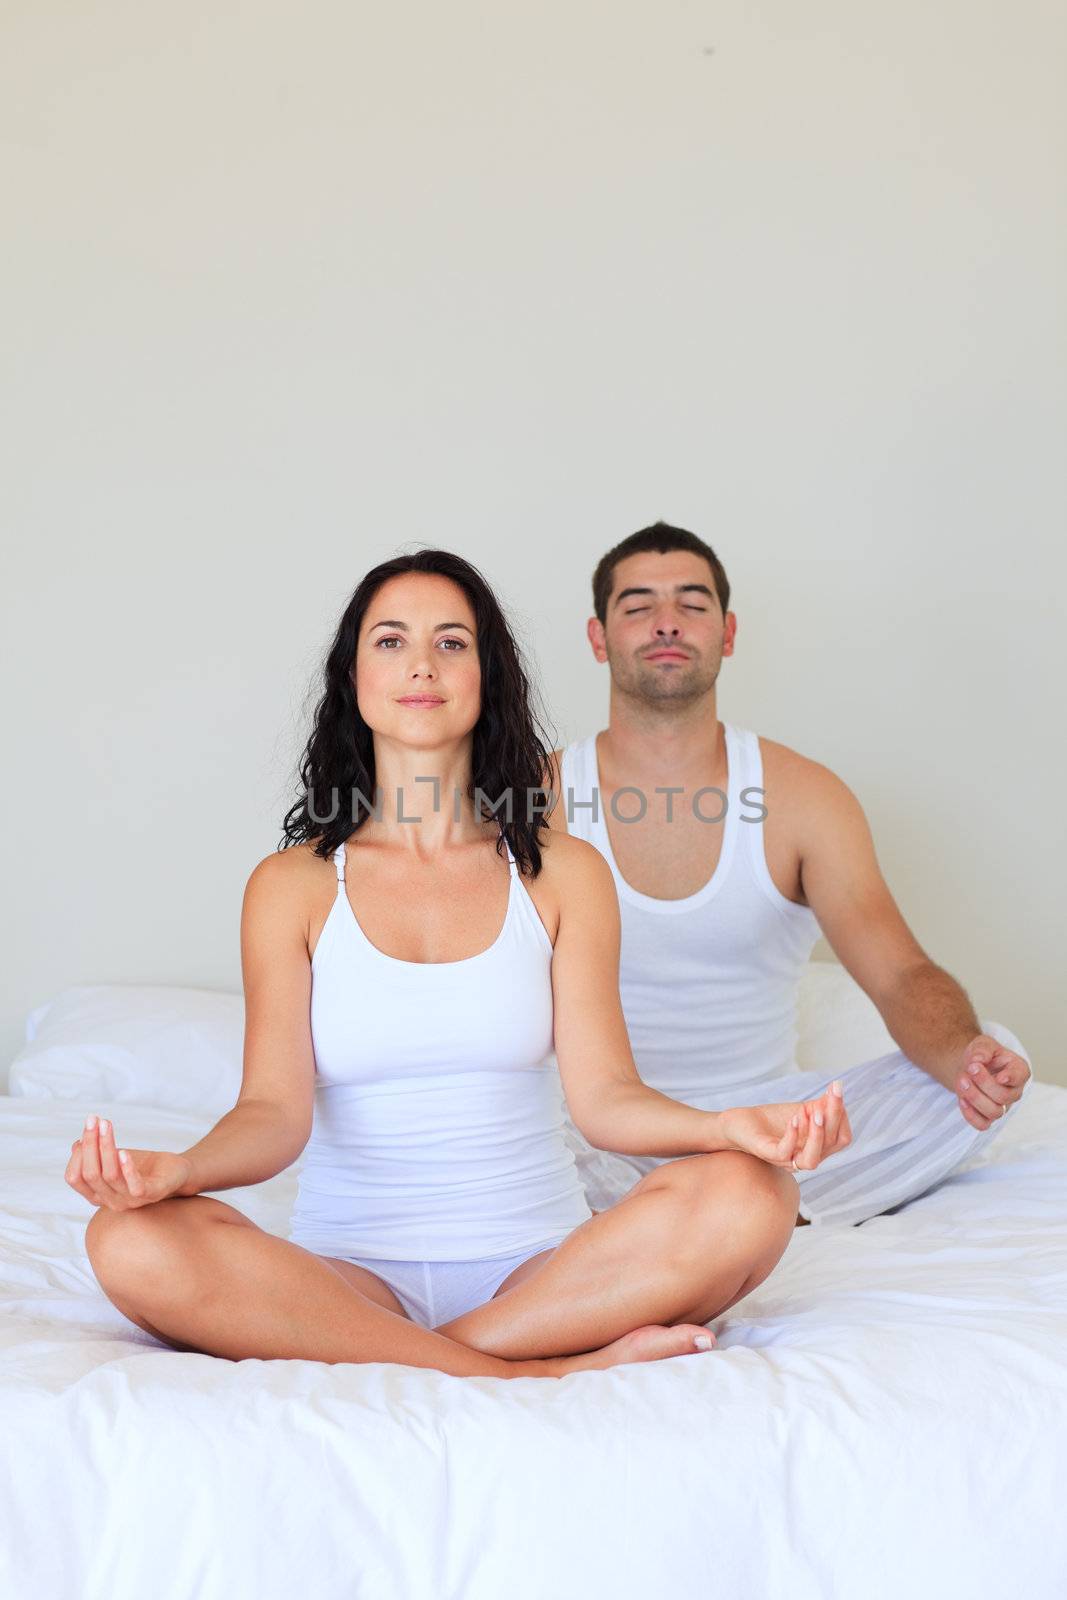 Young couple in meditation pose on bed